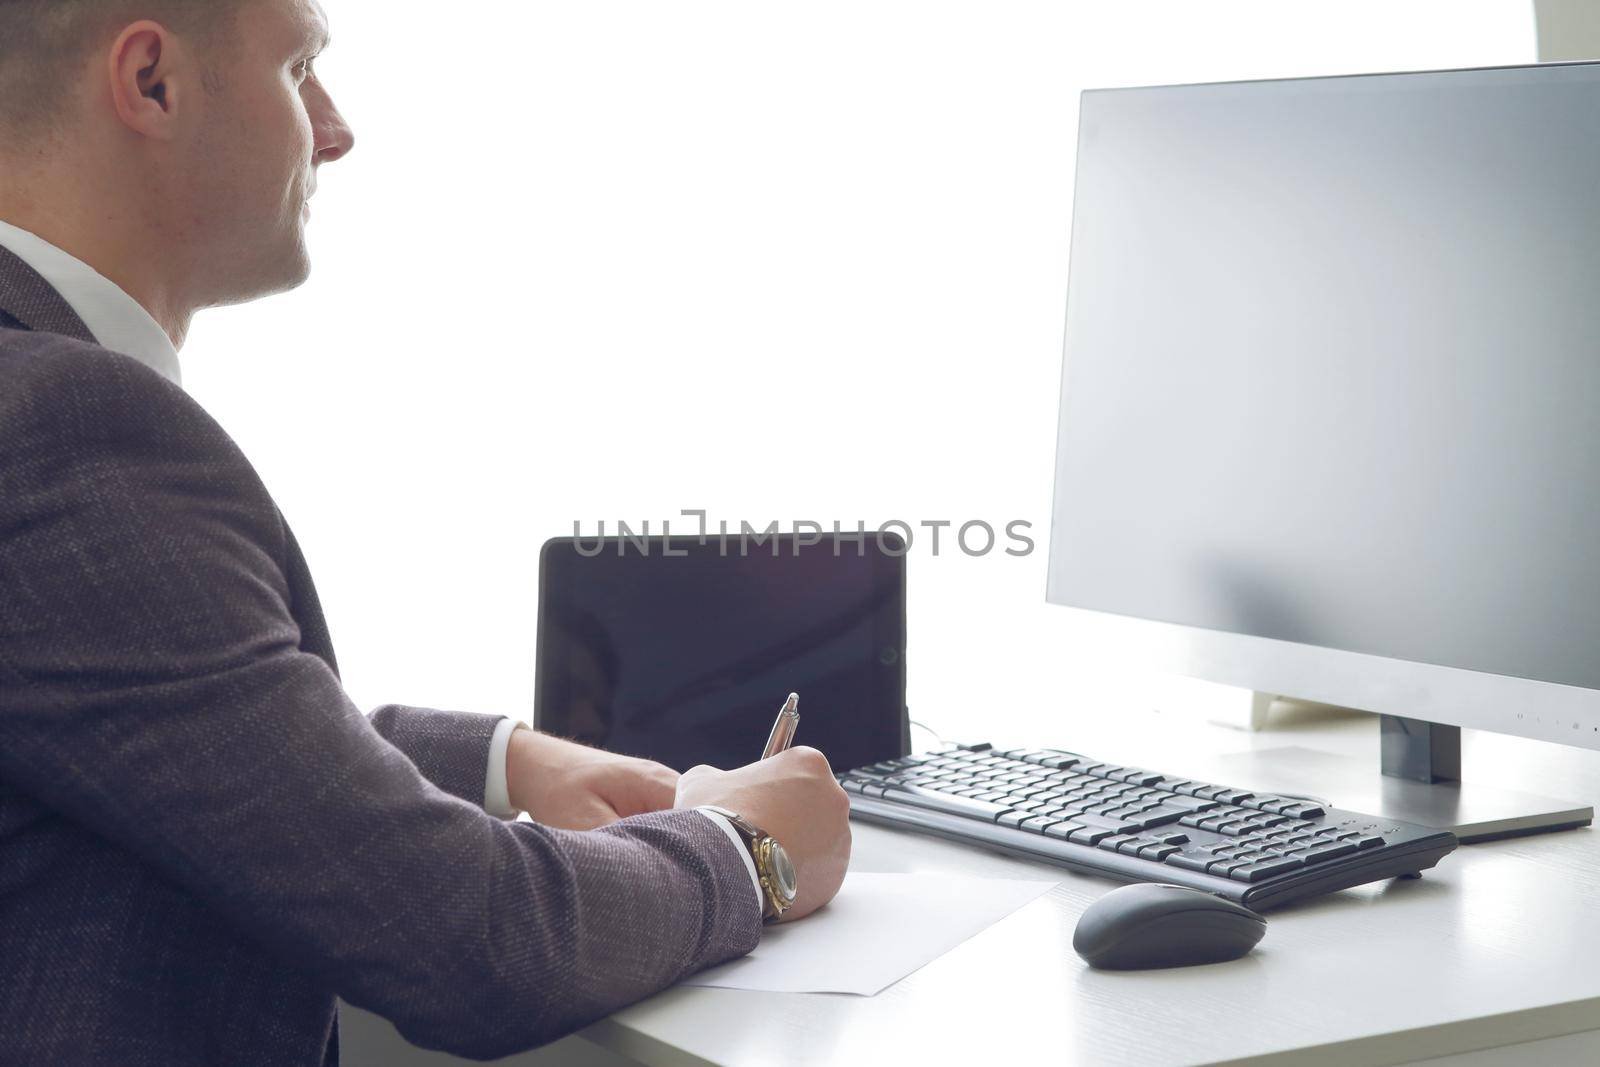 Young business man working at the computer and papers on the table. 